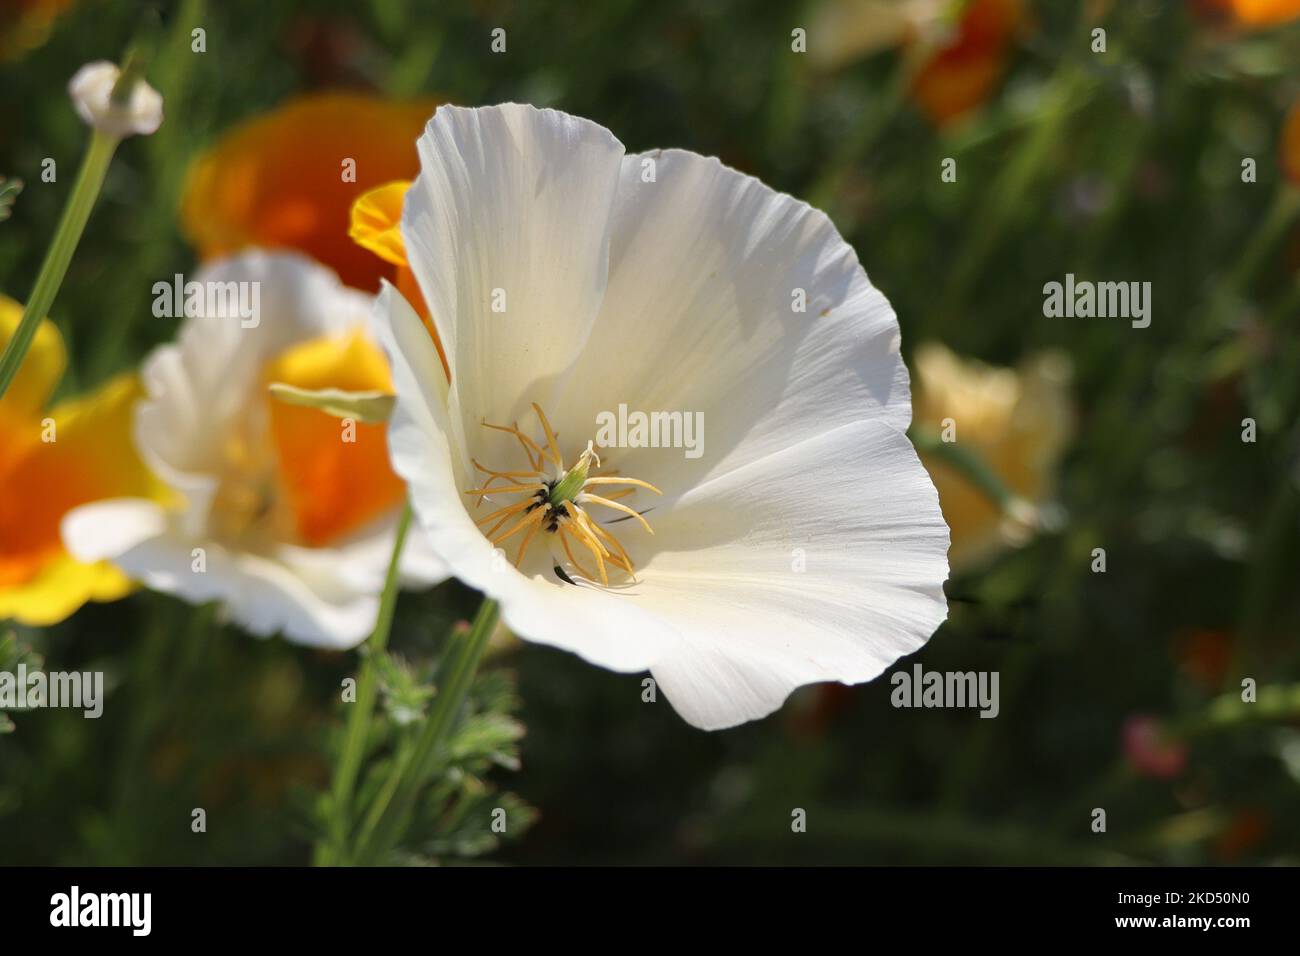 Summer background. Flowers of eschscholzia californica or californian poppy, flowering plant of family papaveraceae Stock Photo